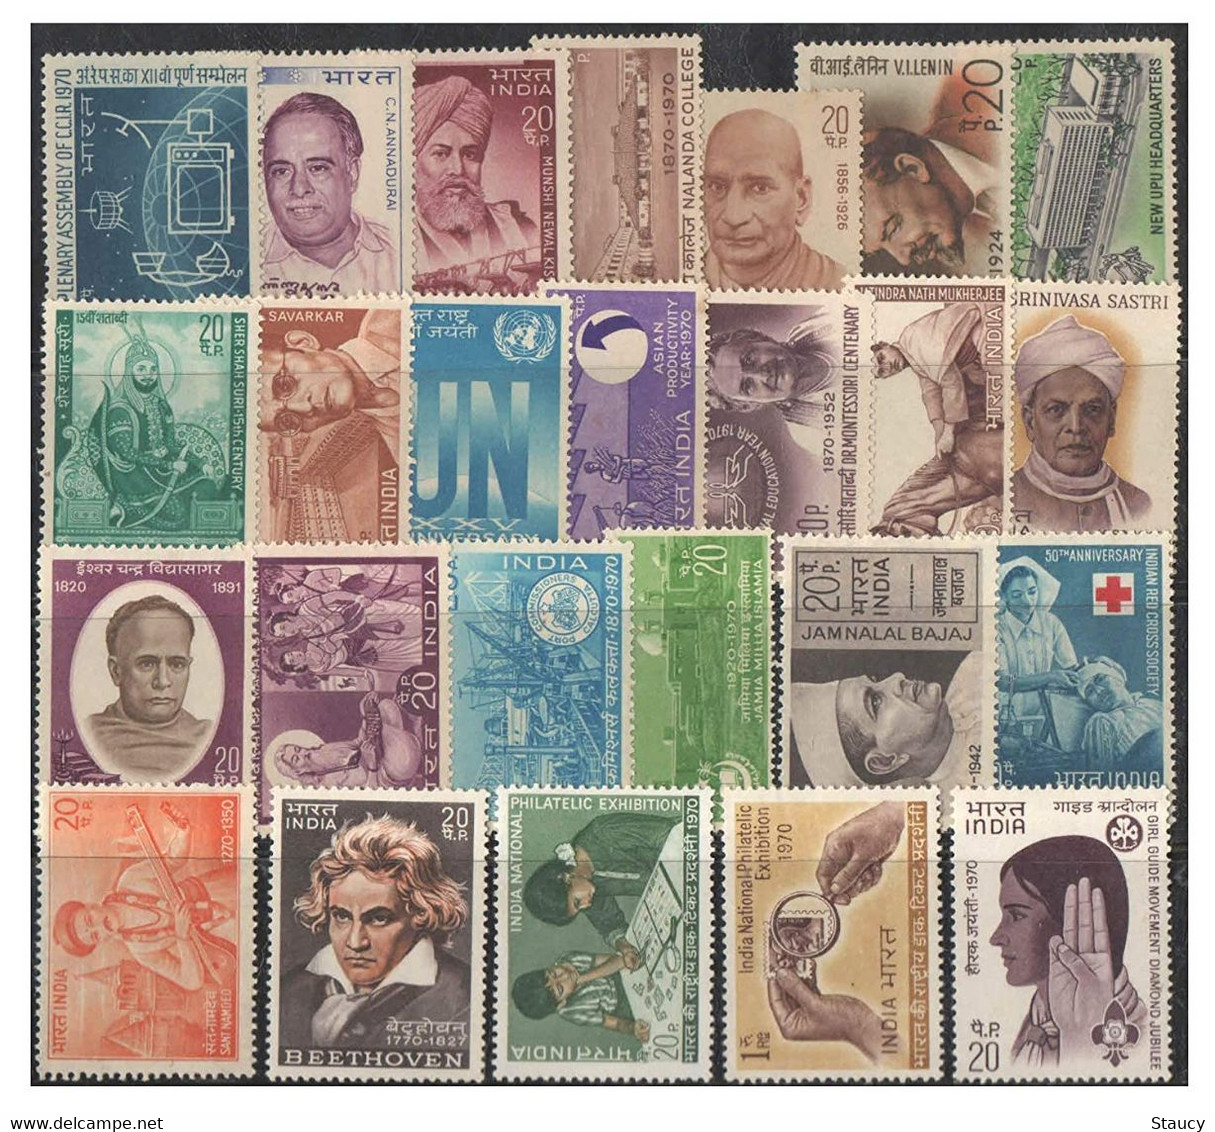 India 1970 Complete Year Pack / Set / Collection Total 25 Stamps (No Missing) MNH As Per Scan - Volledig Jaar